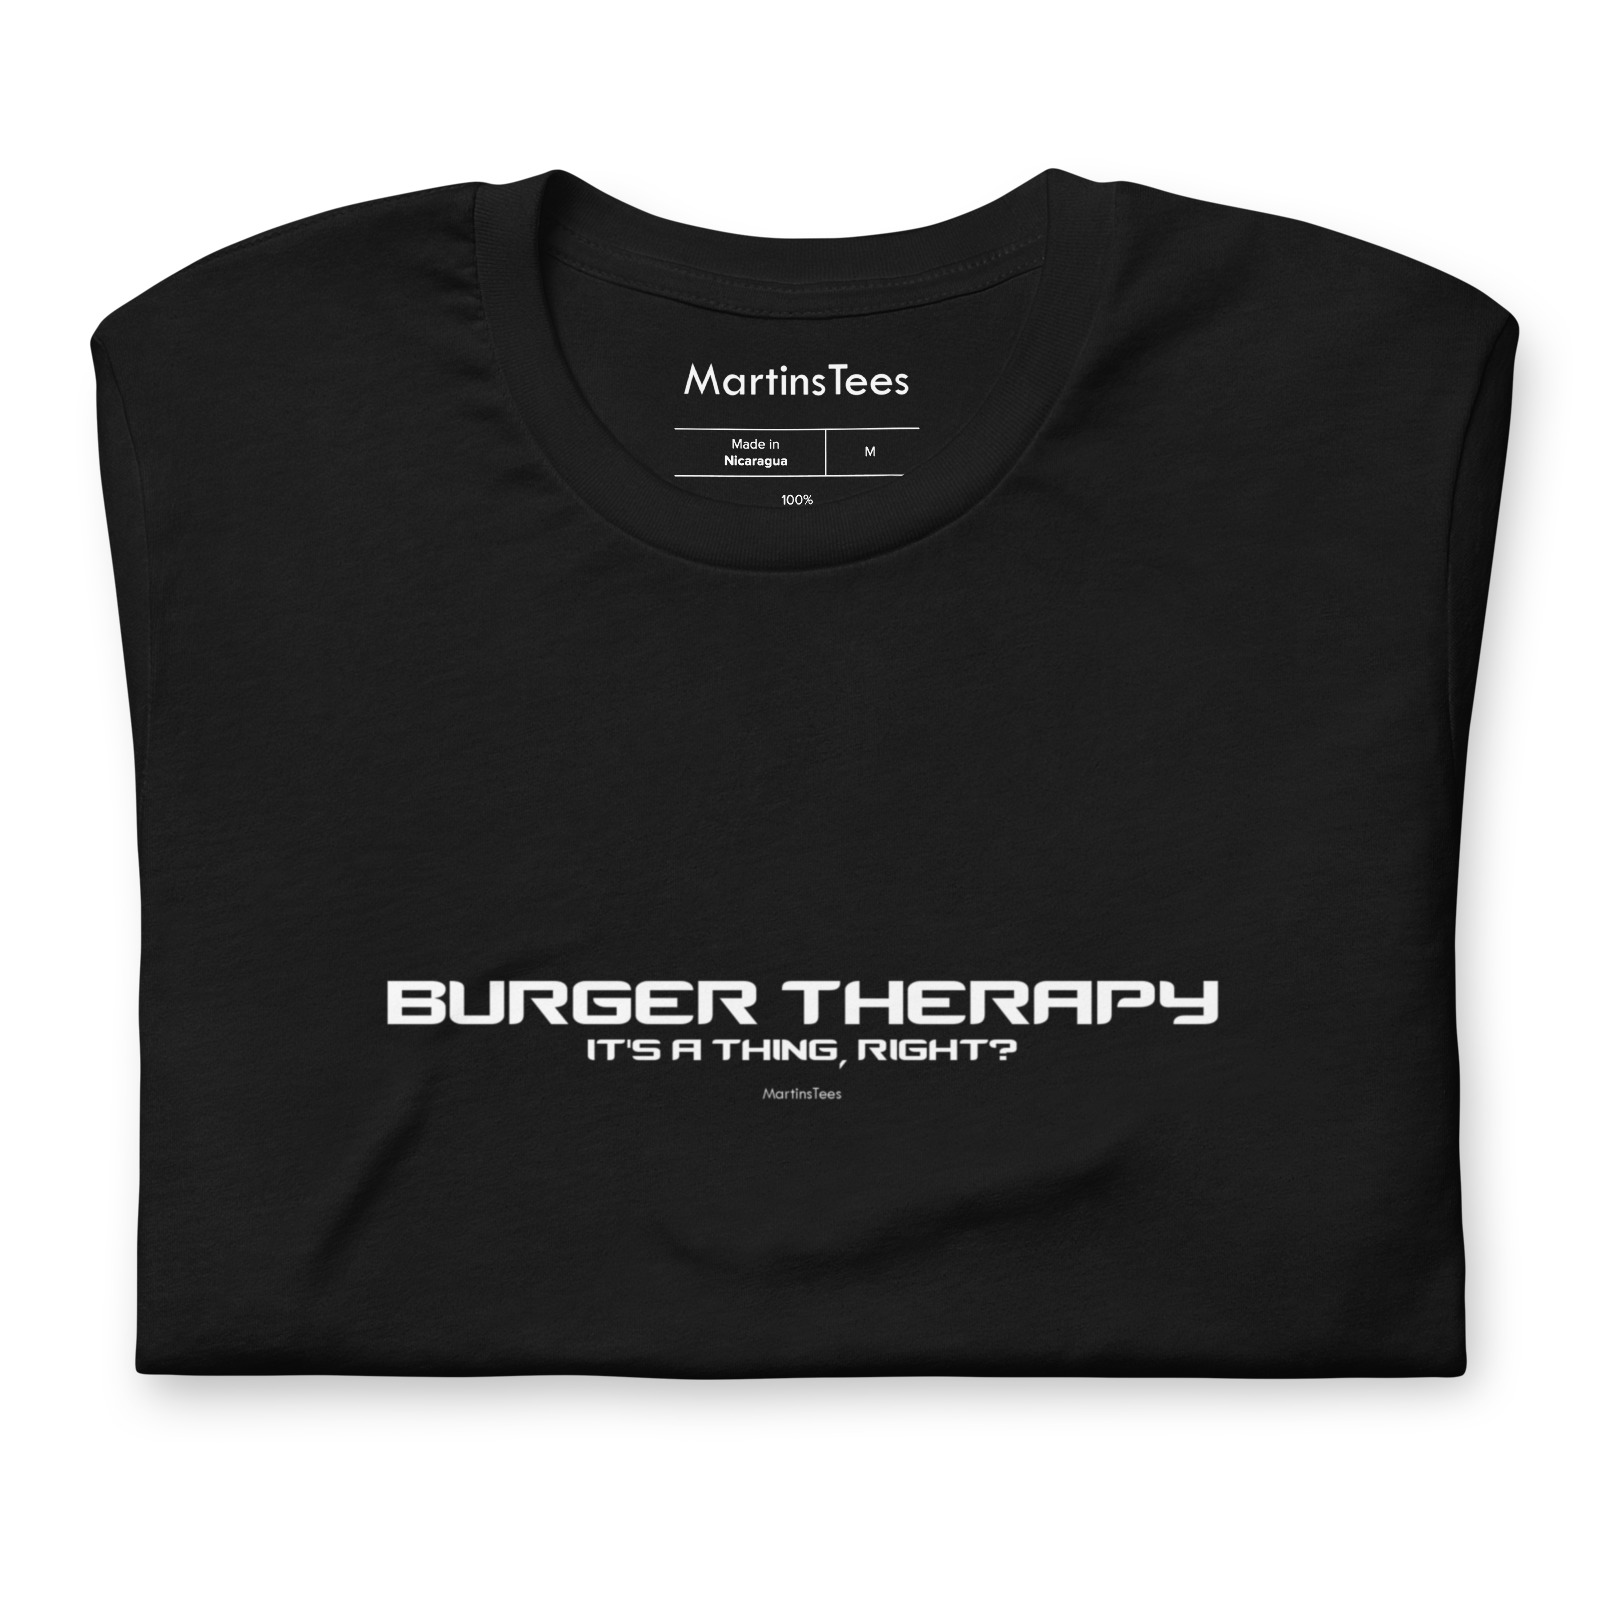 T-shirt: BURGER THERAPY - IT'S A THING, RIGHT?